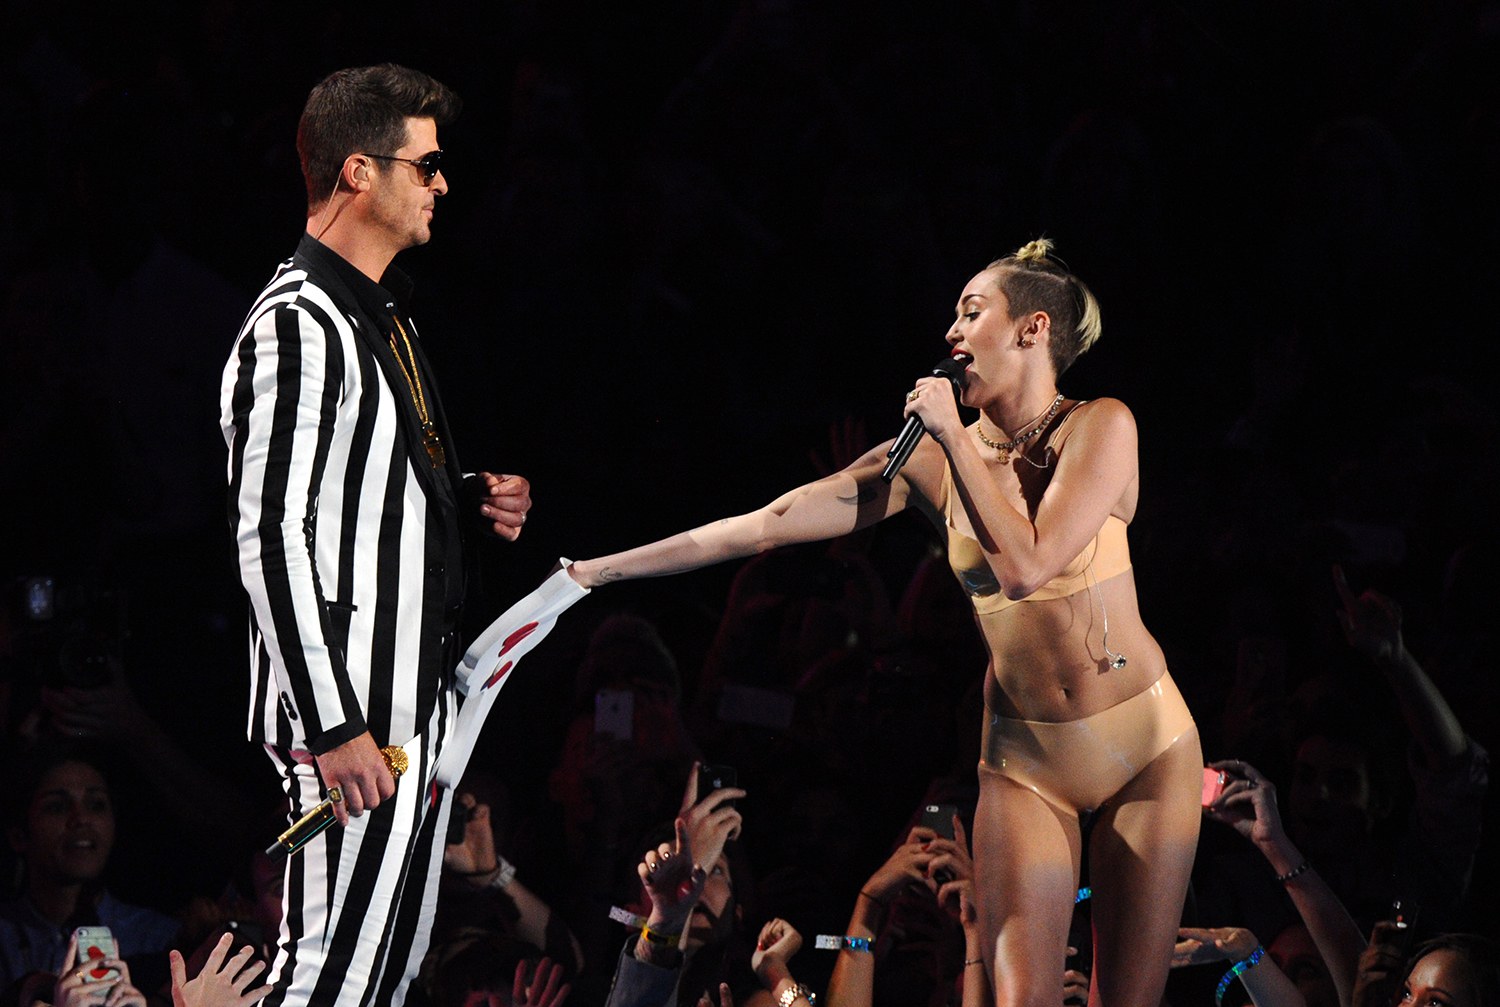 artie olsen share miley cyrus wet and ready photos